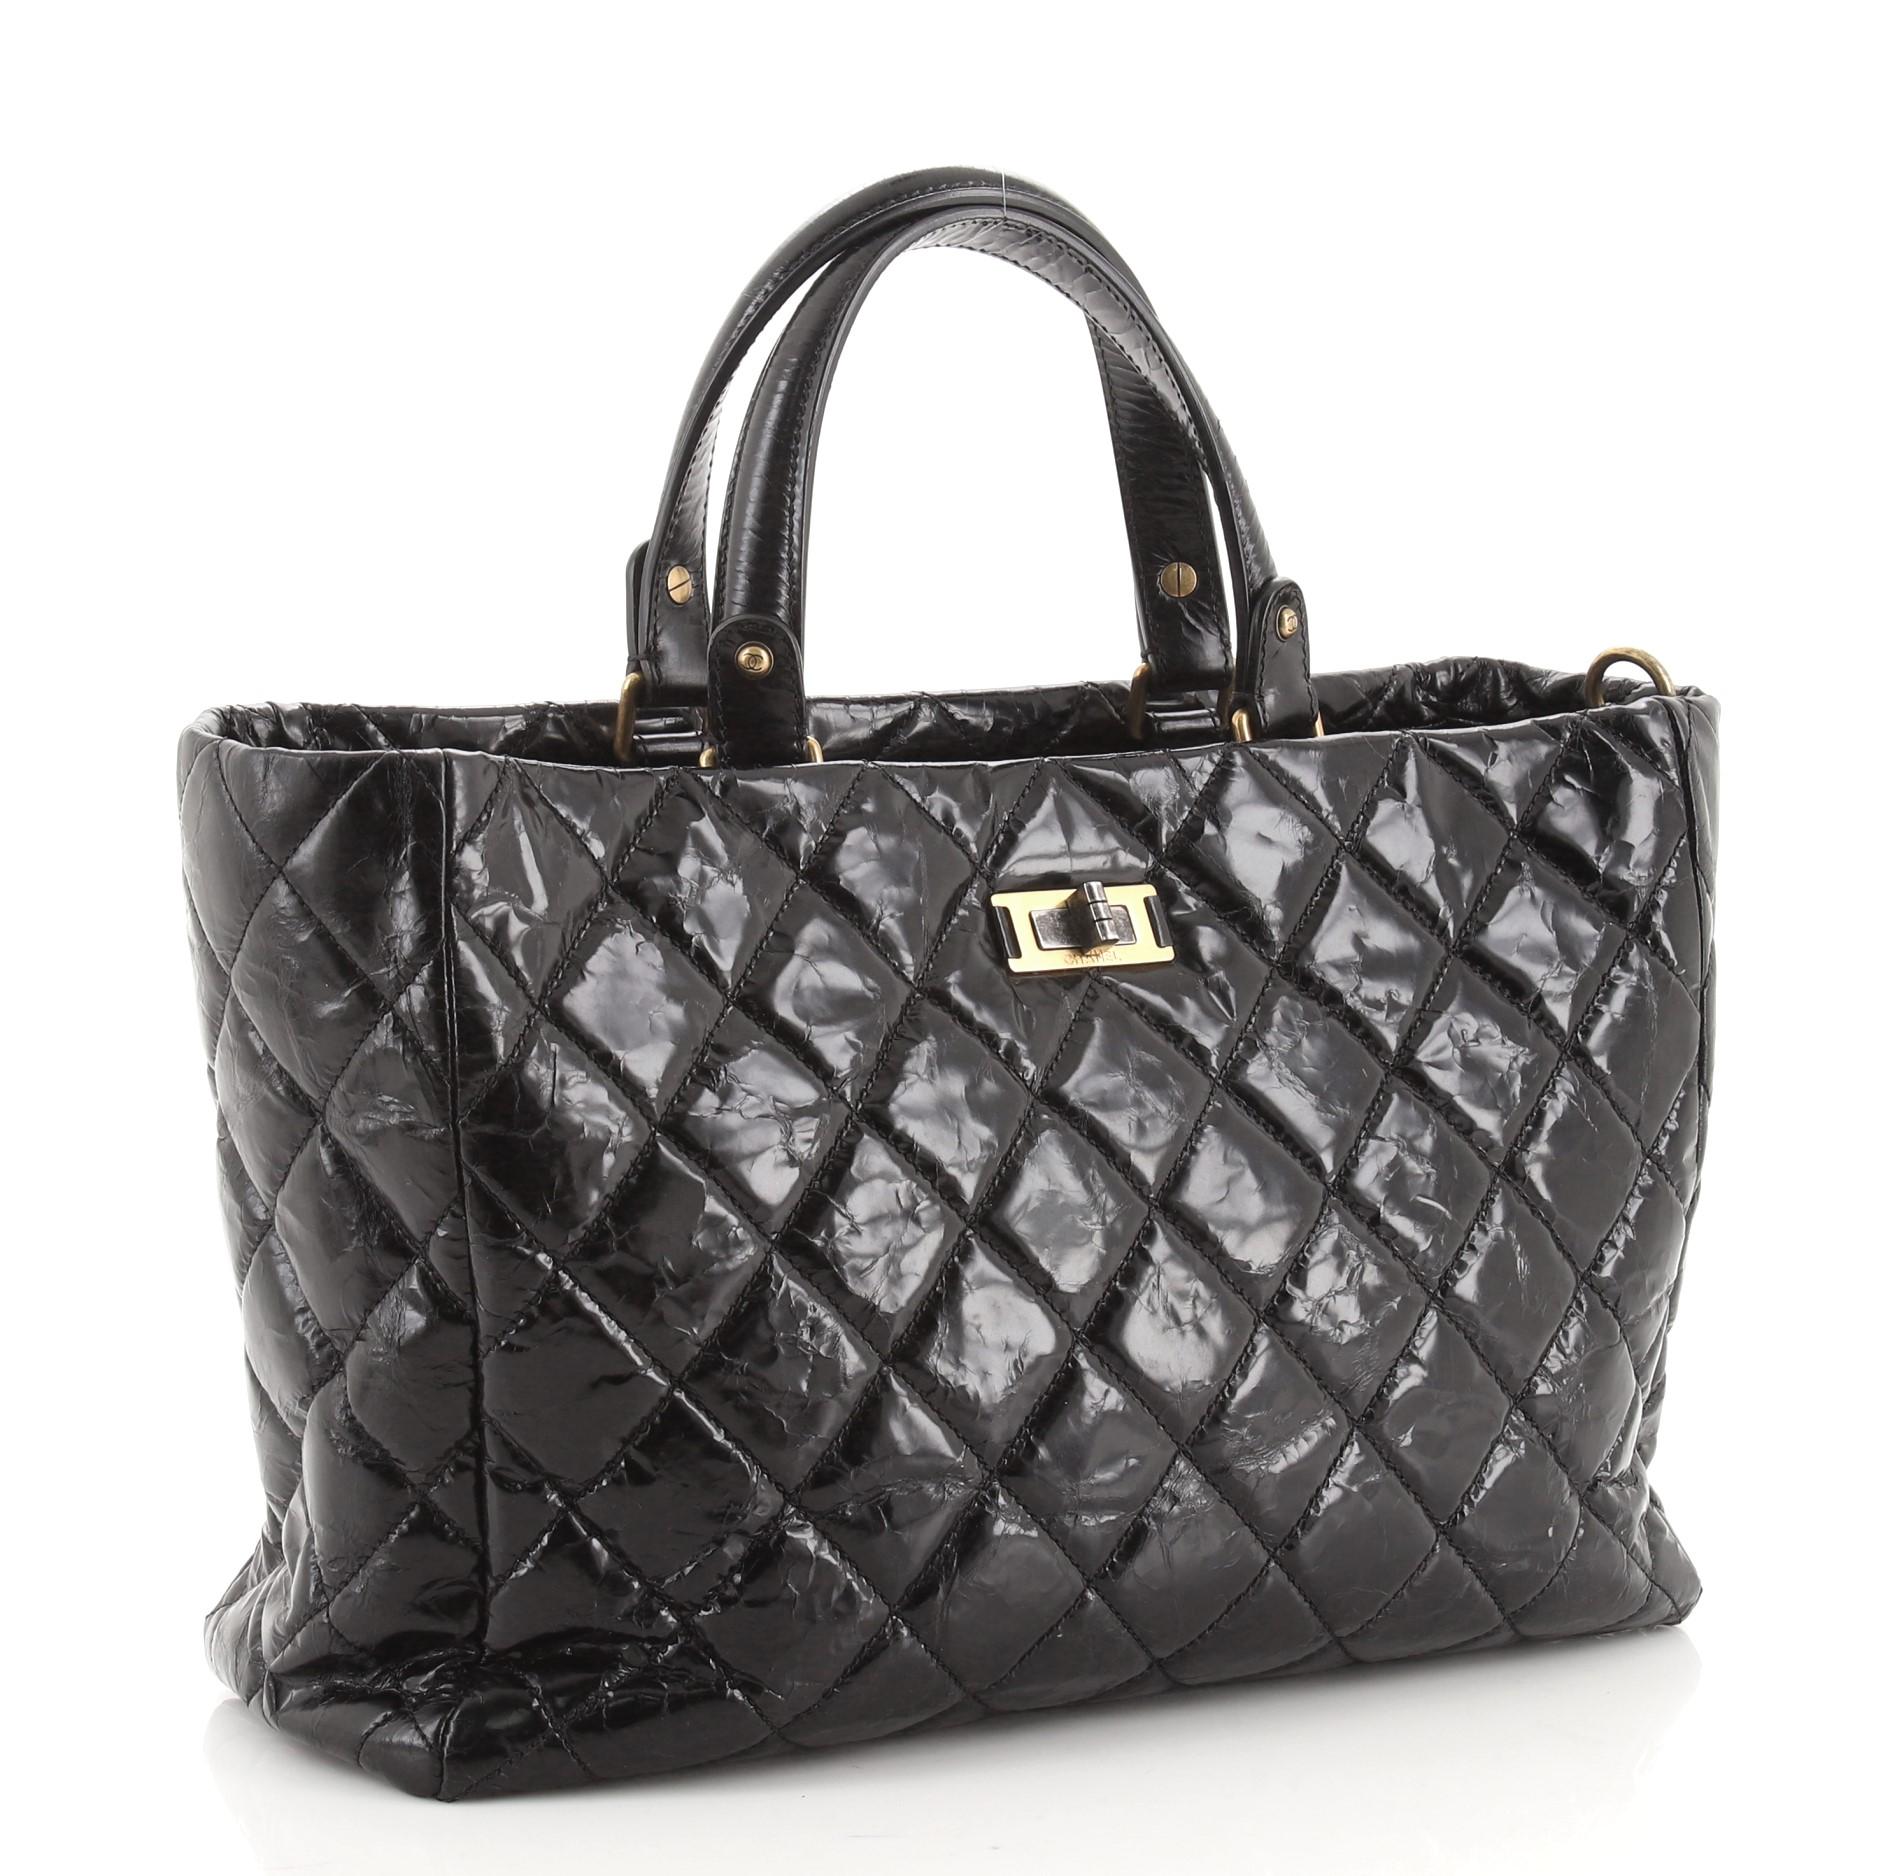 Chanel Rita Tote Quilted Glazed Crackled Calfskin Small
Black Calfskin

Condition Details: Creasing on exterior, minor wear on base corners and in interior, scratches on hardware.

59097MSC

Height 10